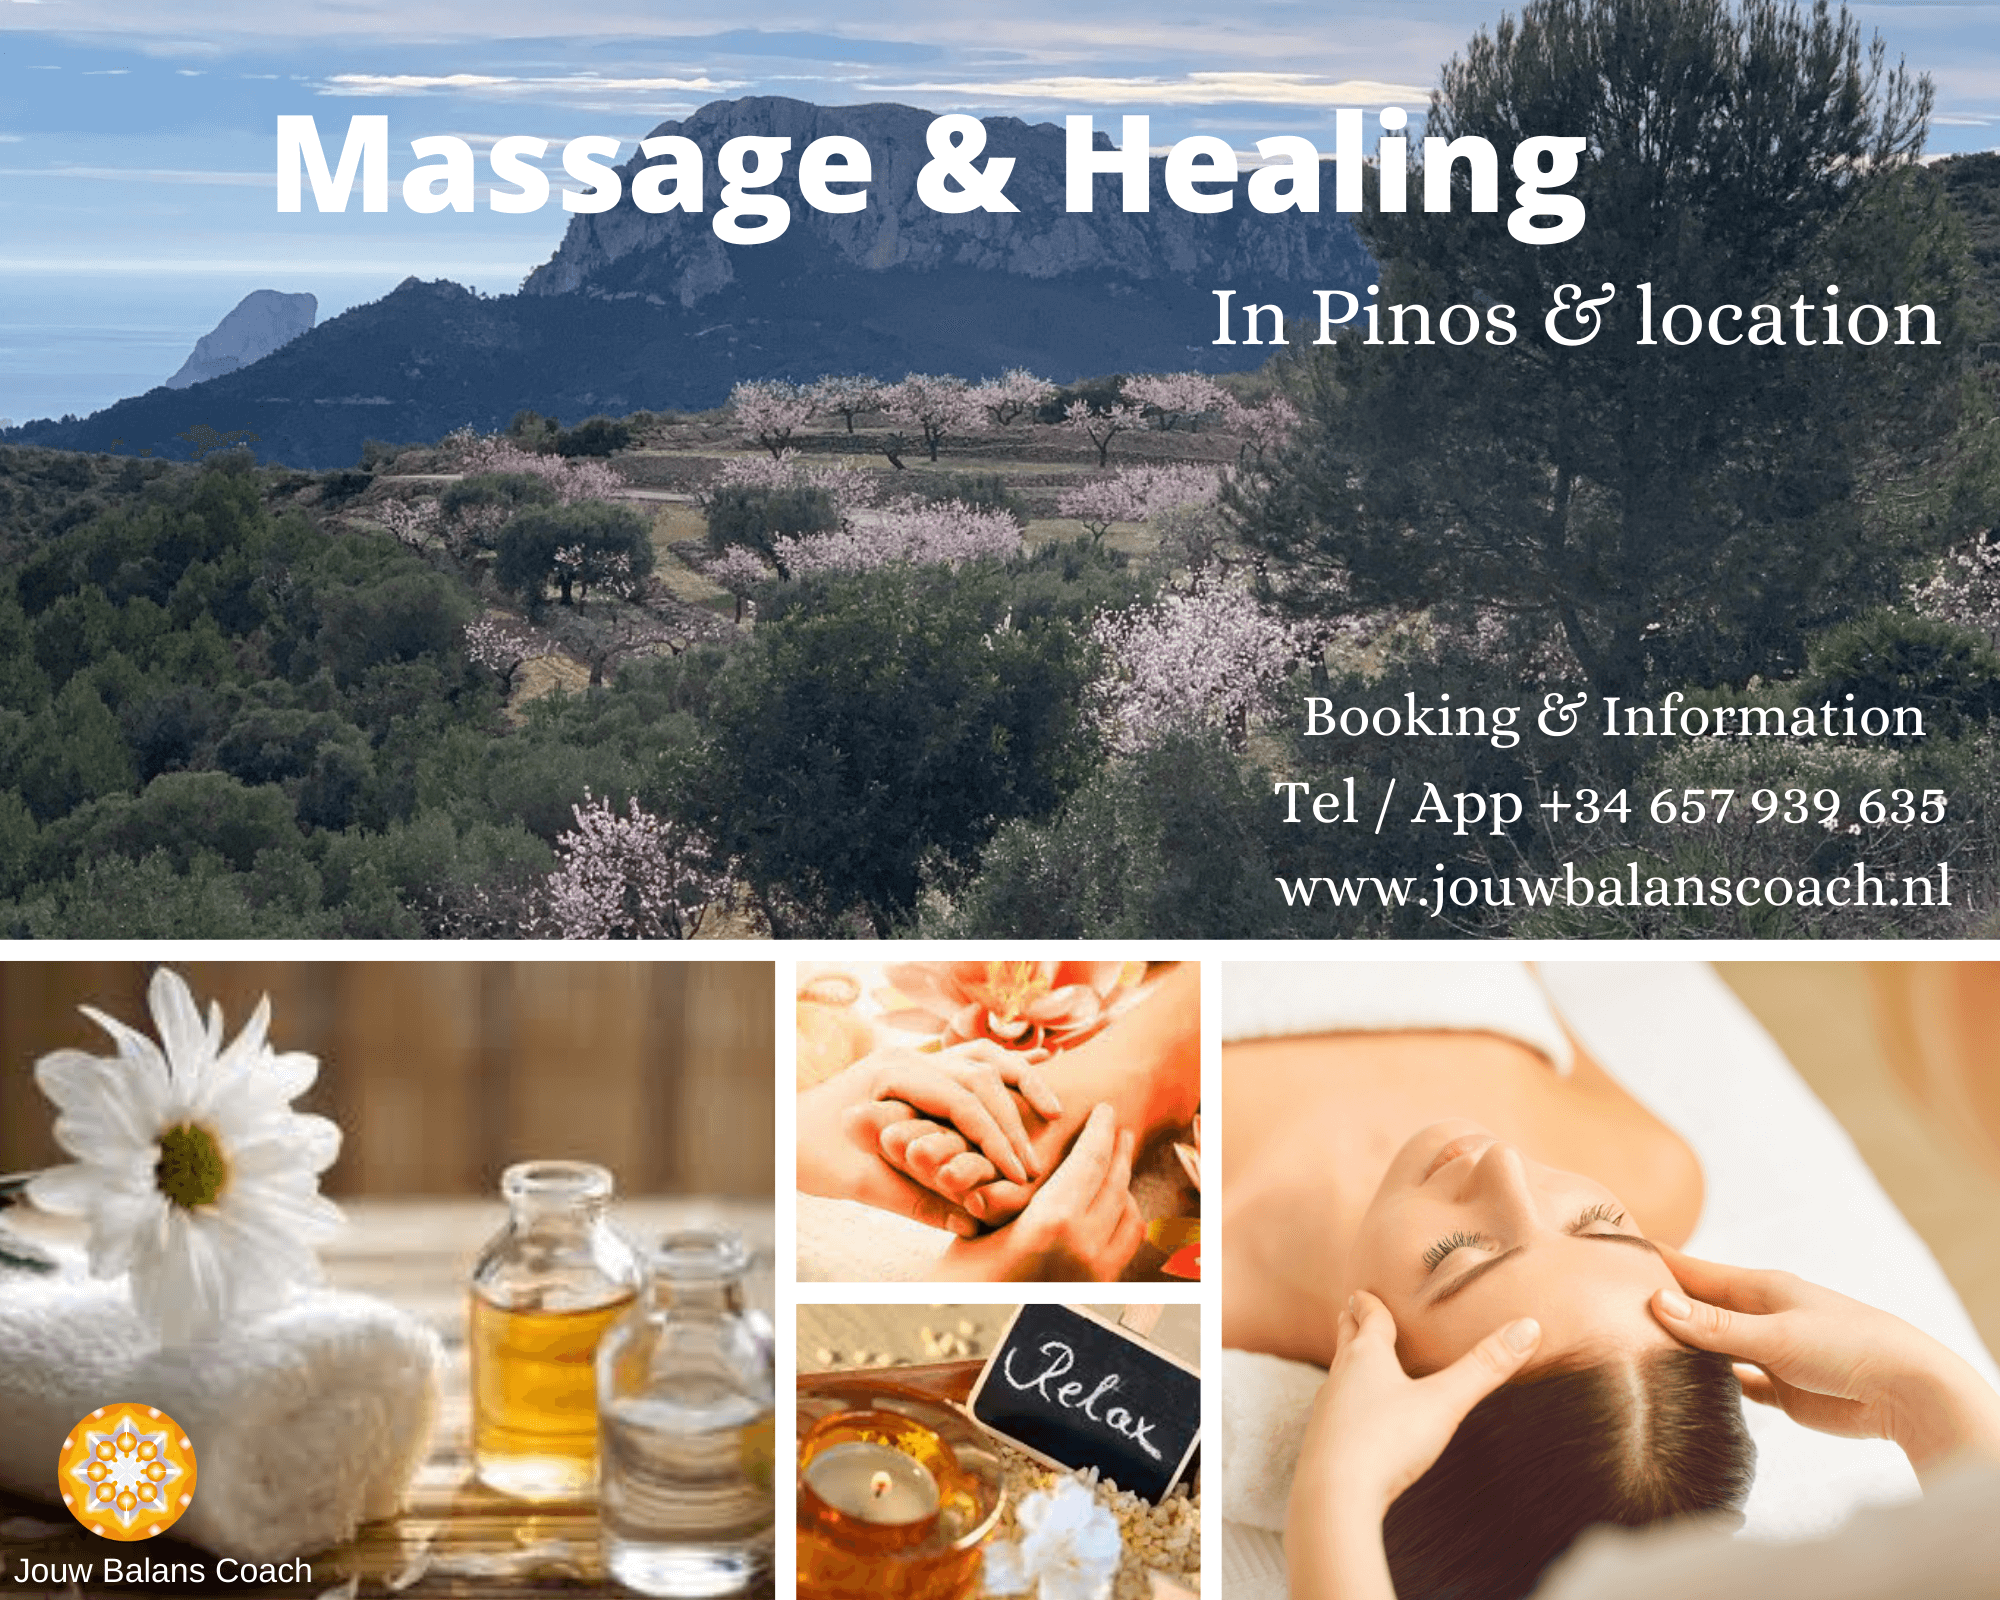 massage and healing also at location